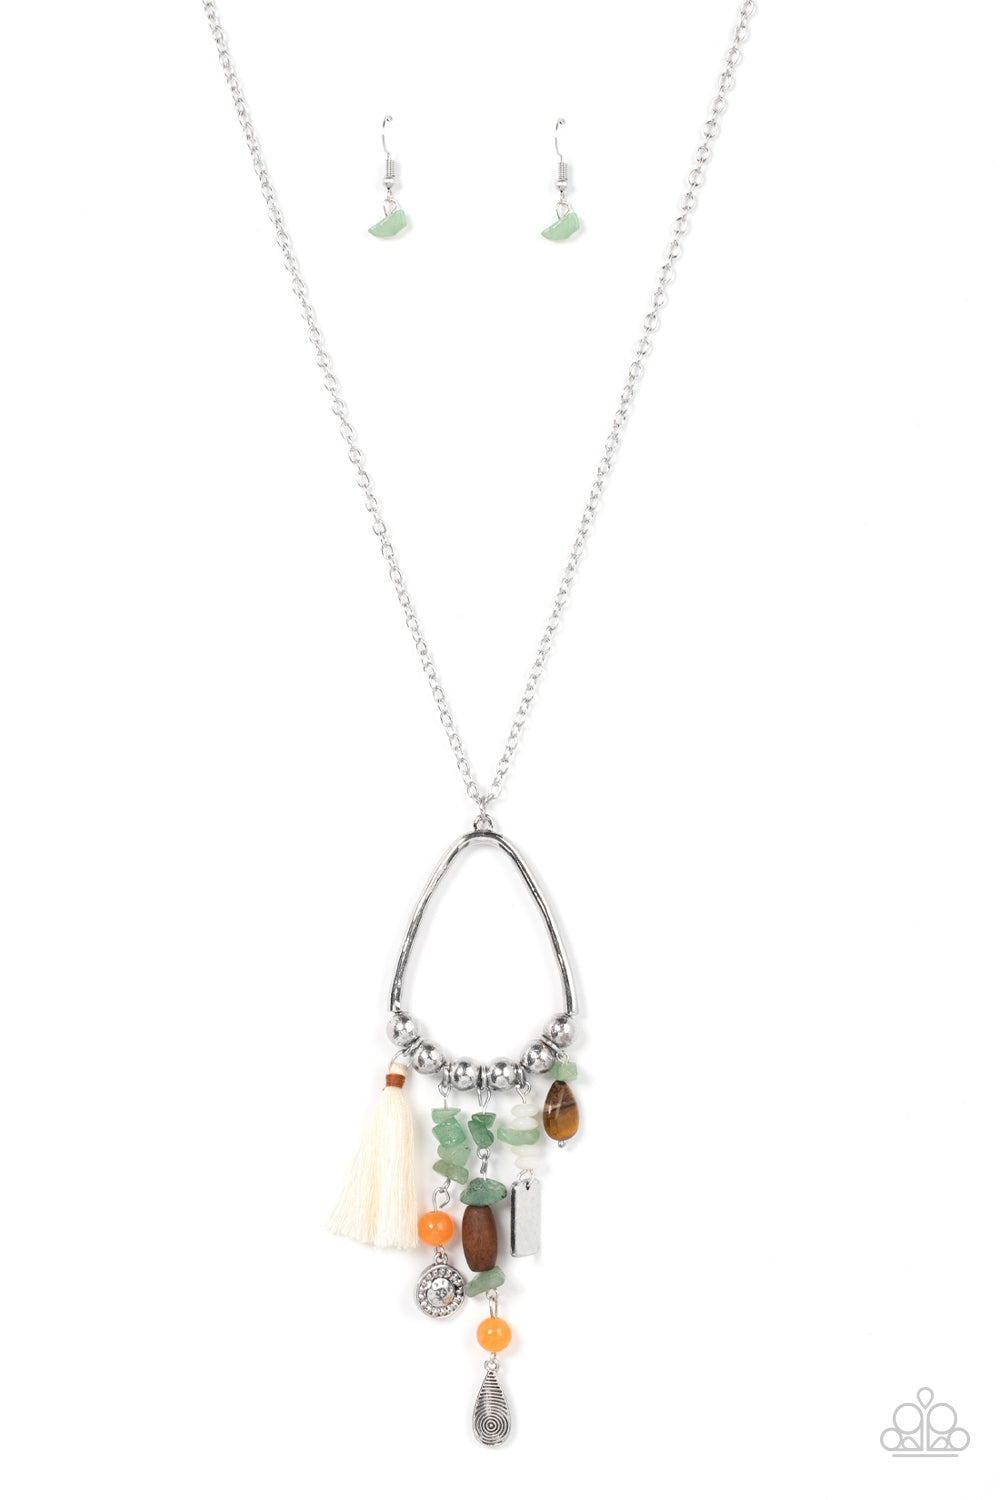 Listen to Your Soul - Green - Paparazzi - Infused with a multicolored collection of natural stone beads and pebbles, stacks of textured silver charms and mismatched wooden beads create earthy tassels at the bottom of a silver beaded teardrop frame. Enhanced with a shiny white threaded tassel, the whimsical fringe swings from the bottom of an extended silver chain.